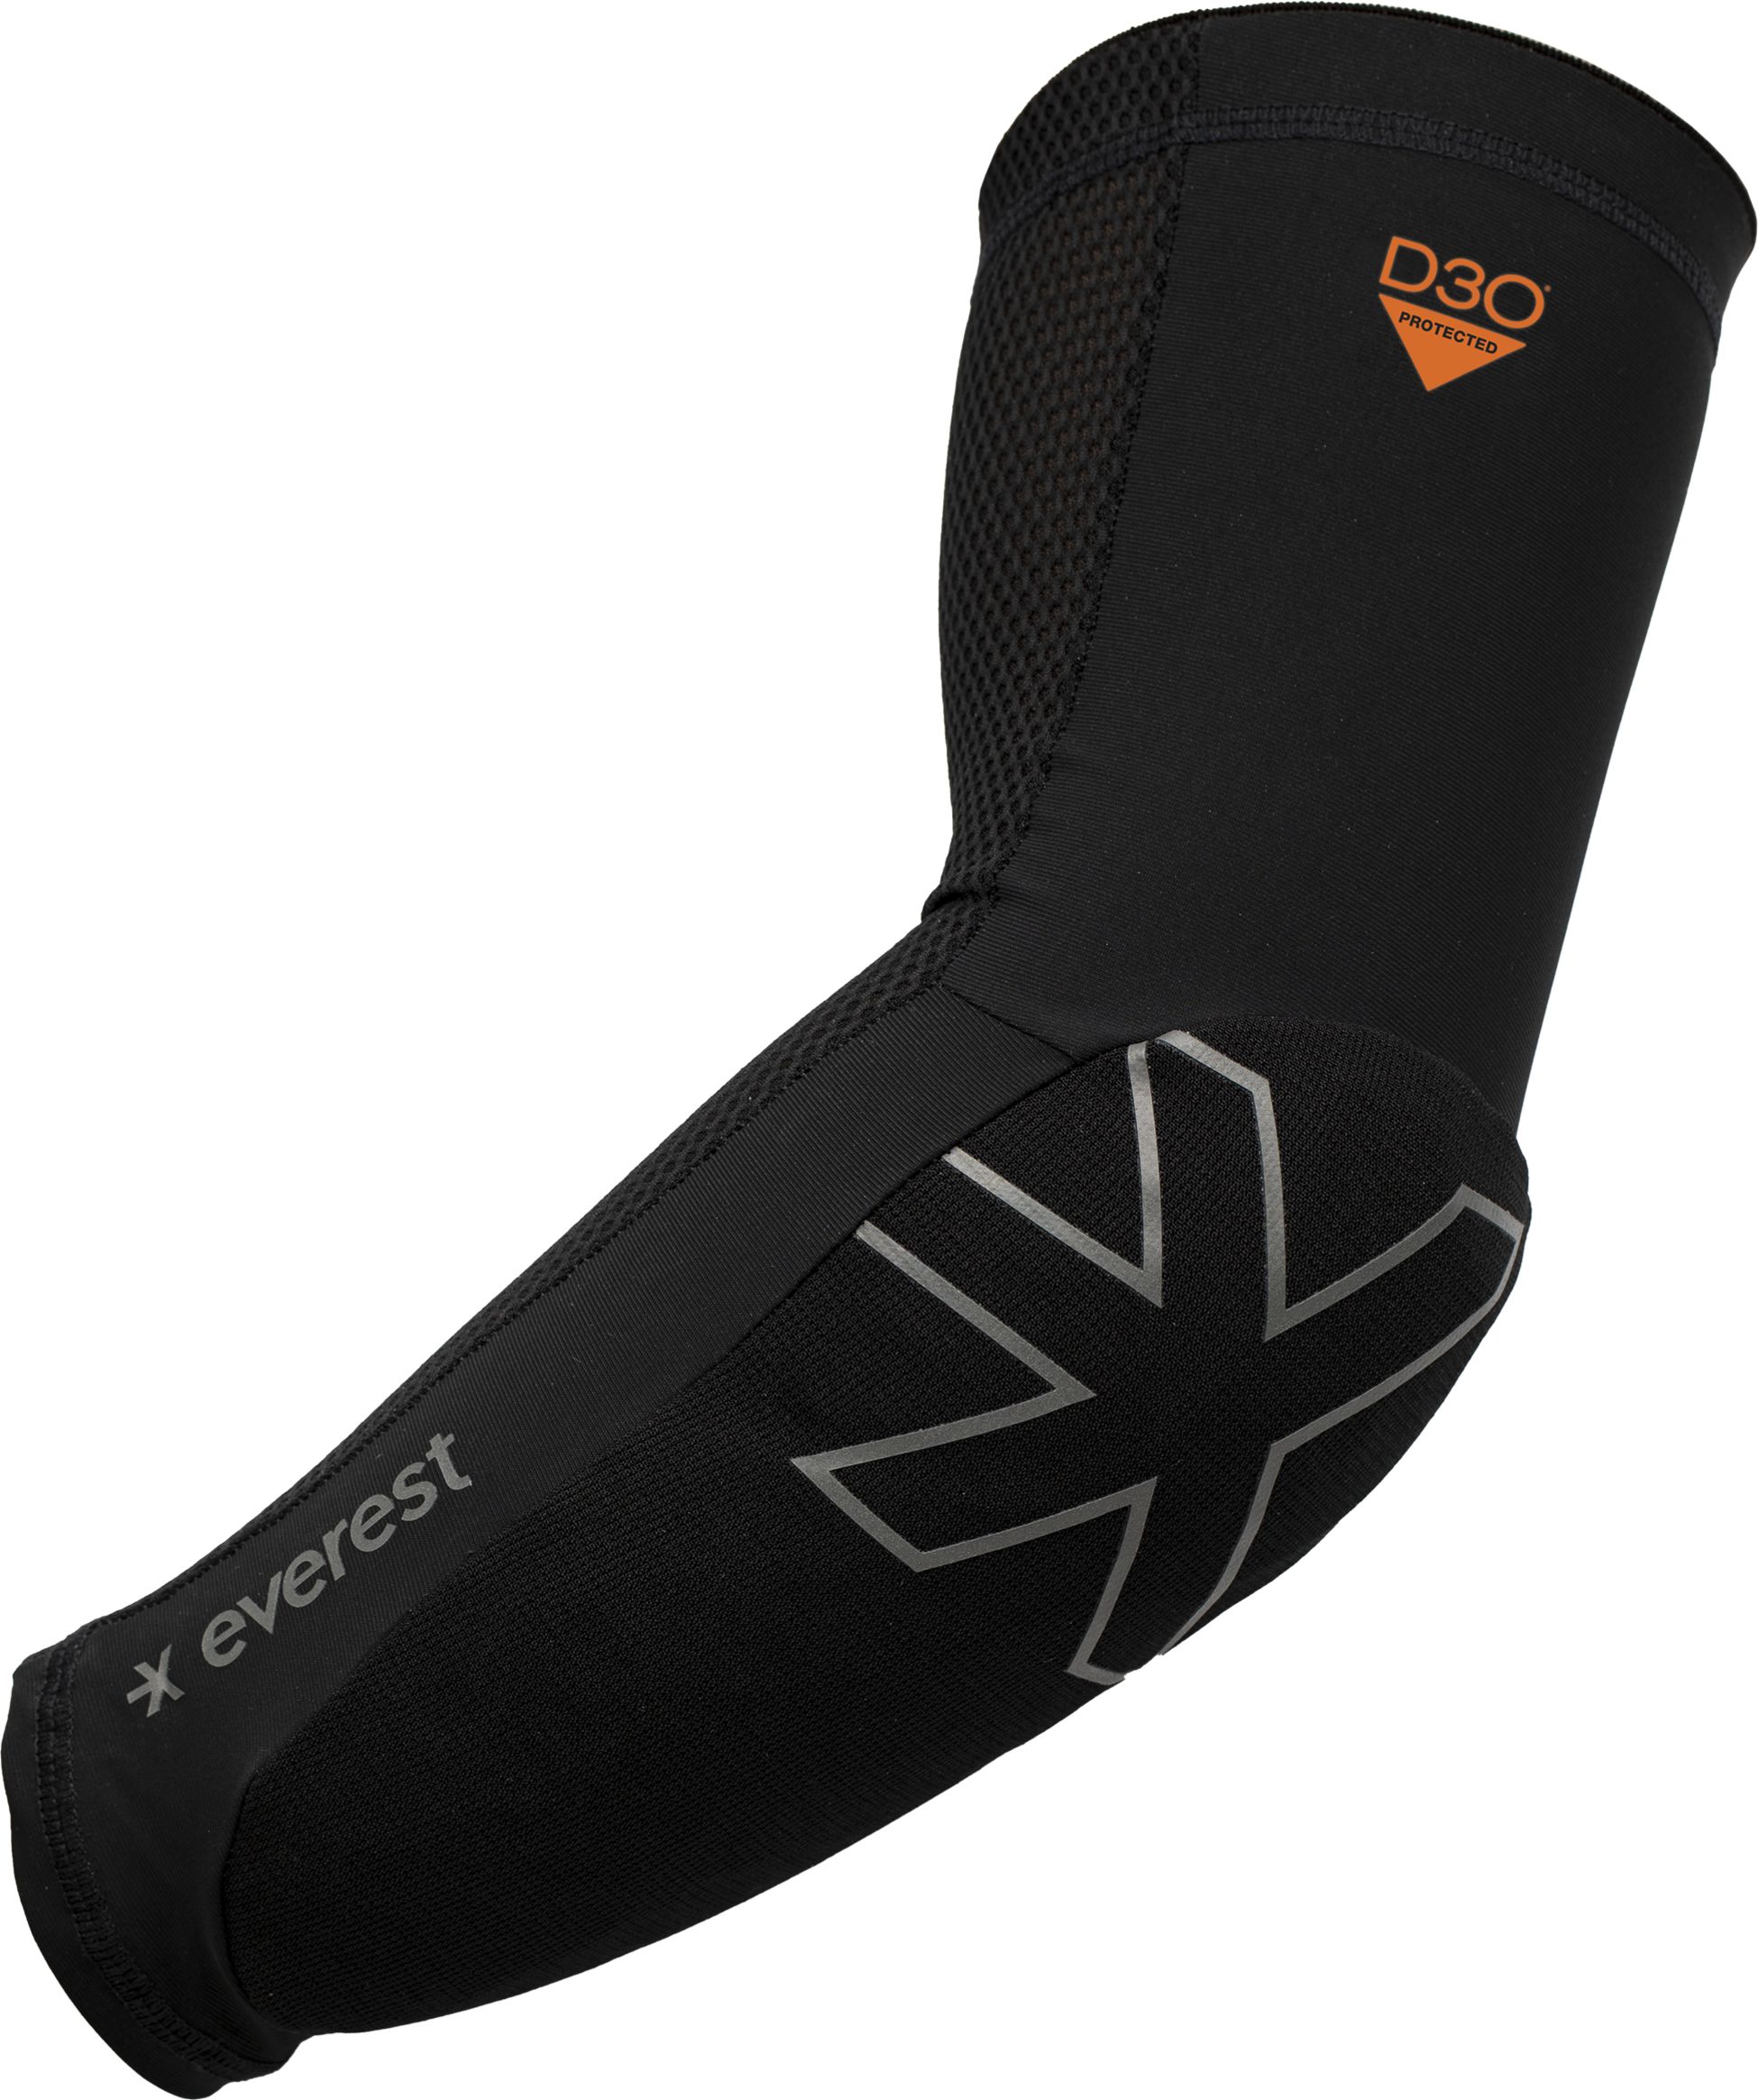 EVEREST, D3O ELBOW GUARDS